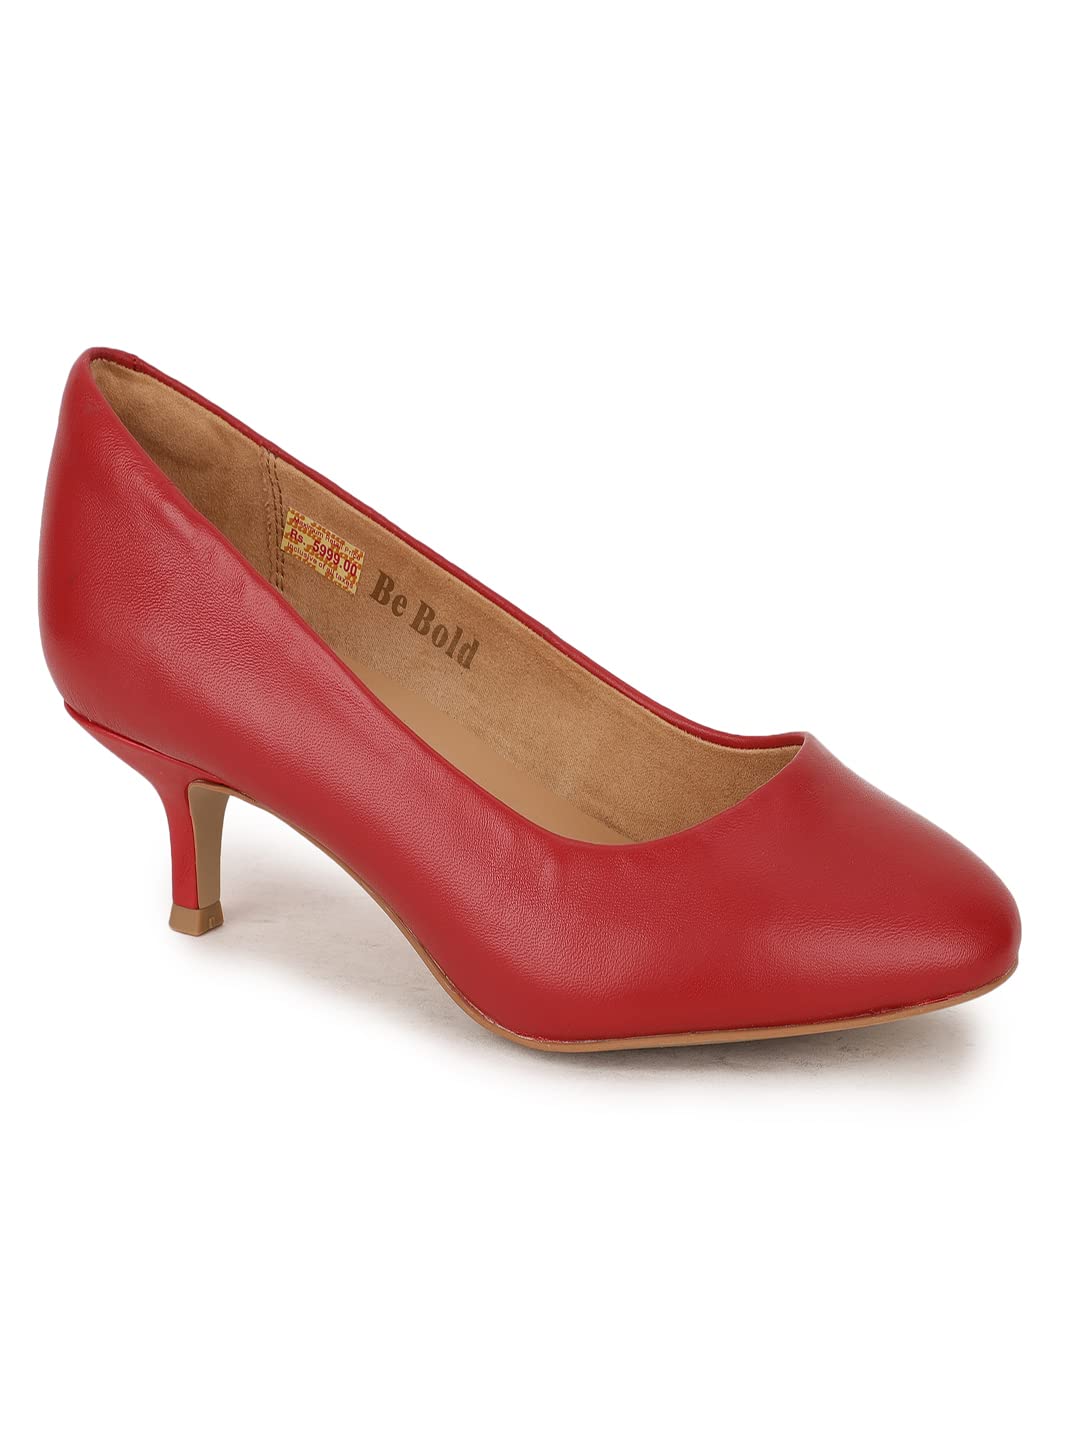 Hush Puppies Womens All Day Pump Red Pump